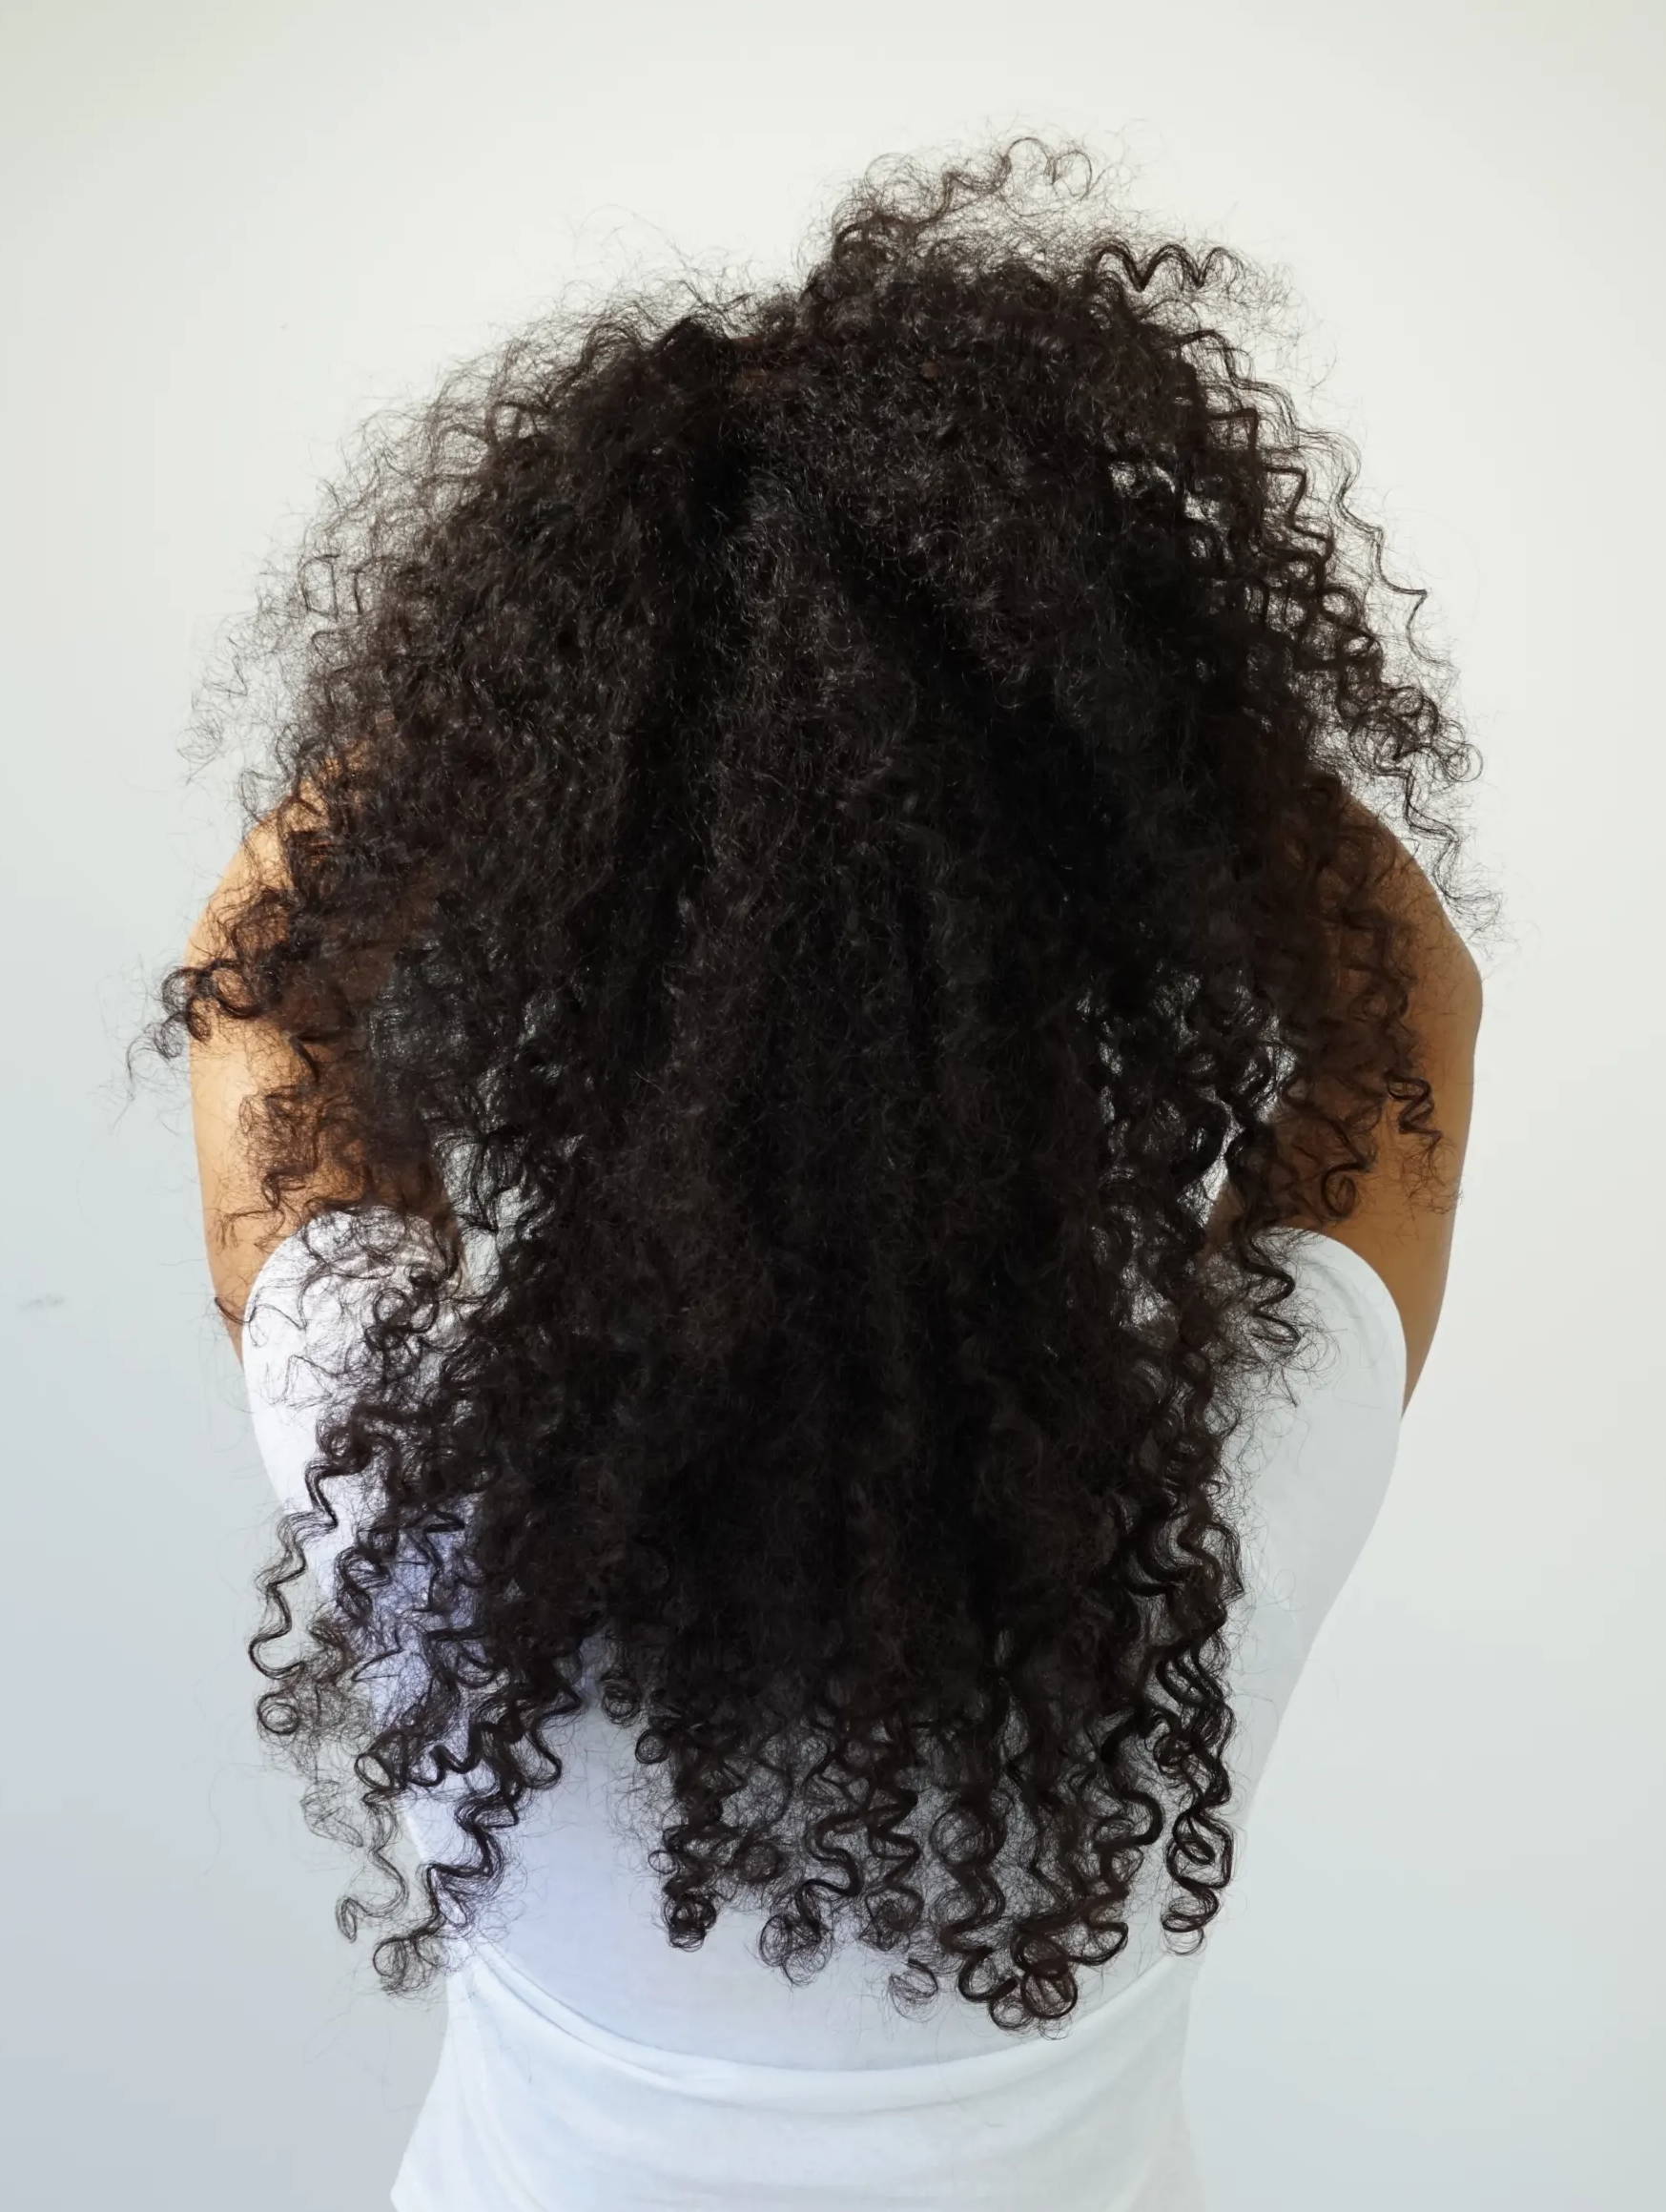 10 Signs Your Curls Could Be Damaged | LUS Brands